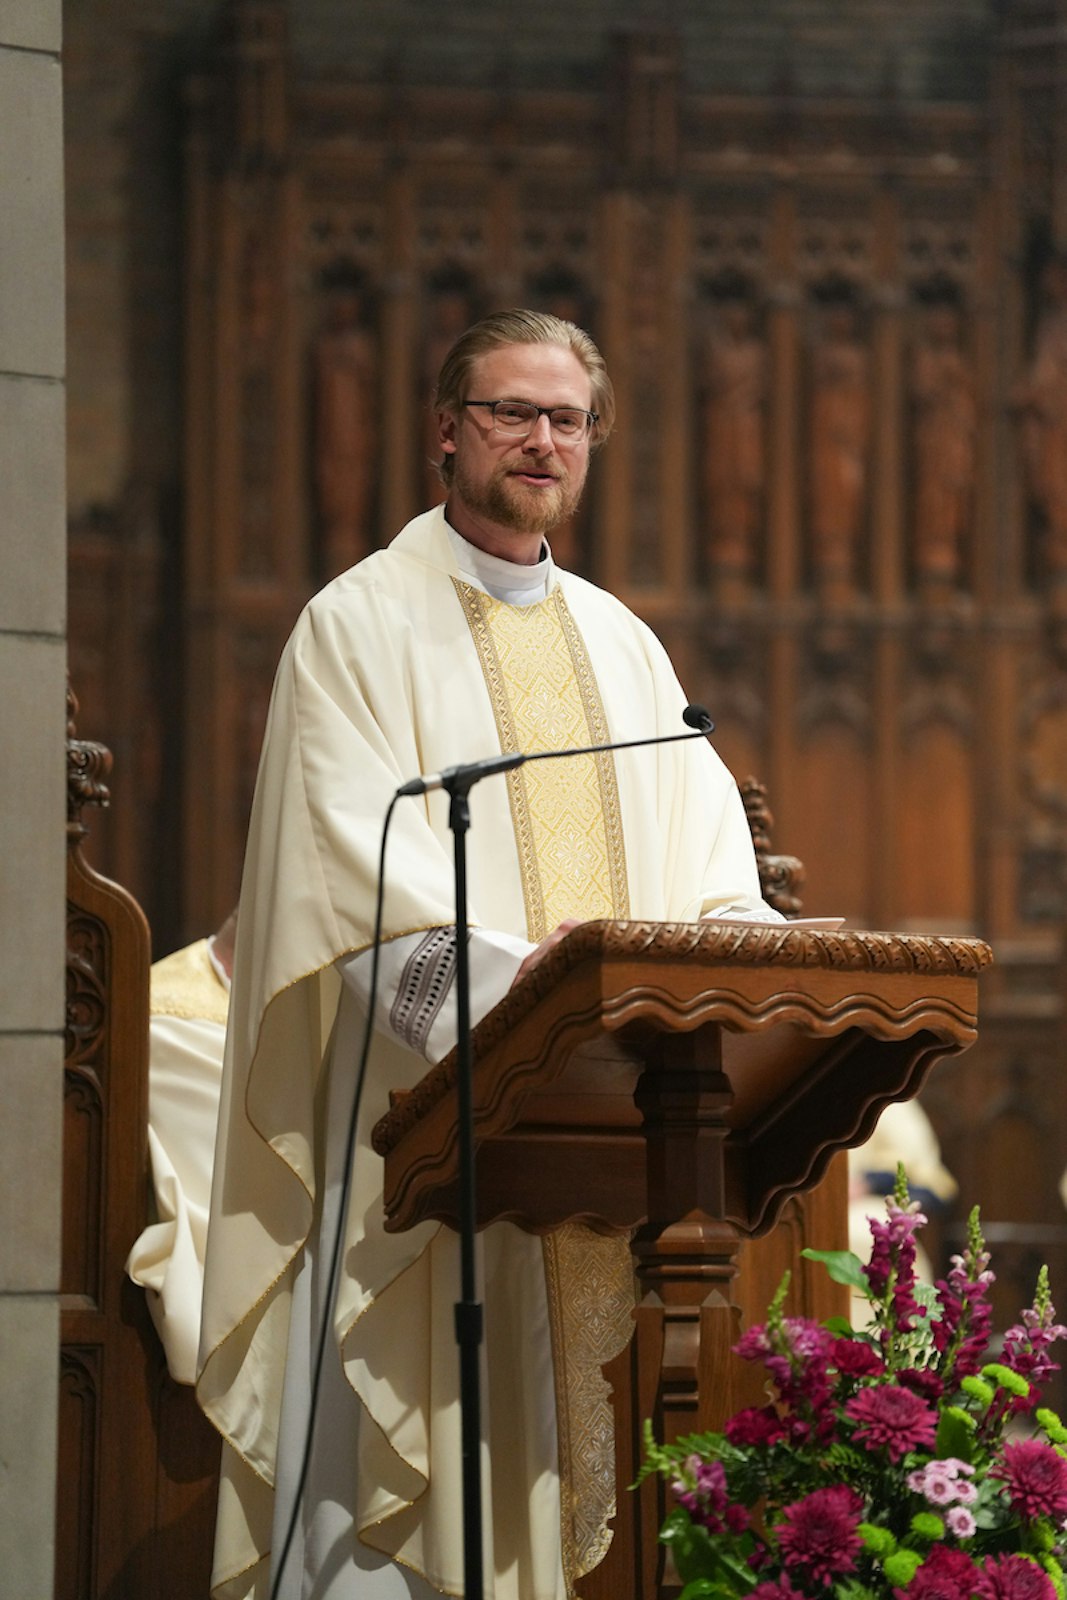 Fr. Zach Mabee of the Diocese of Lansing, a member of the philosophy faculty and pre-theology priestly formation team at Sacred Heart Major Seminary, told graduates that it is Jesus Christ who remains the primary reason for Sacred Heart Major Seminary.